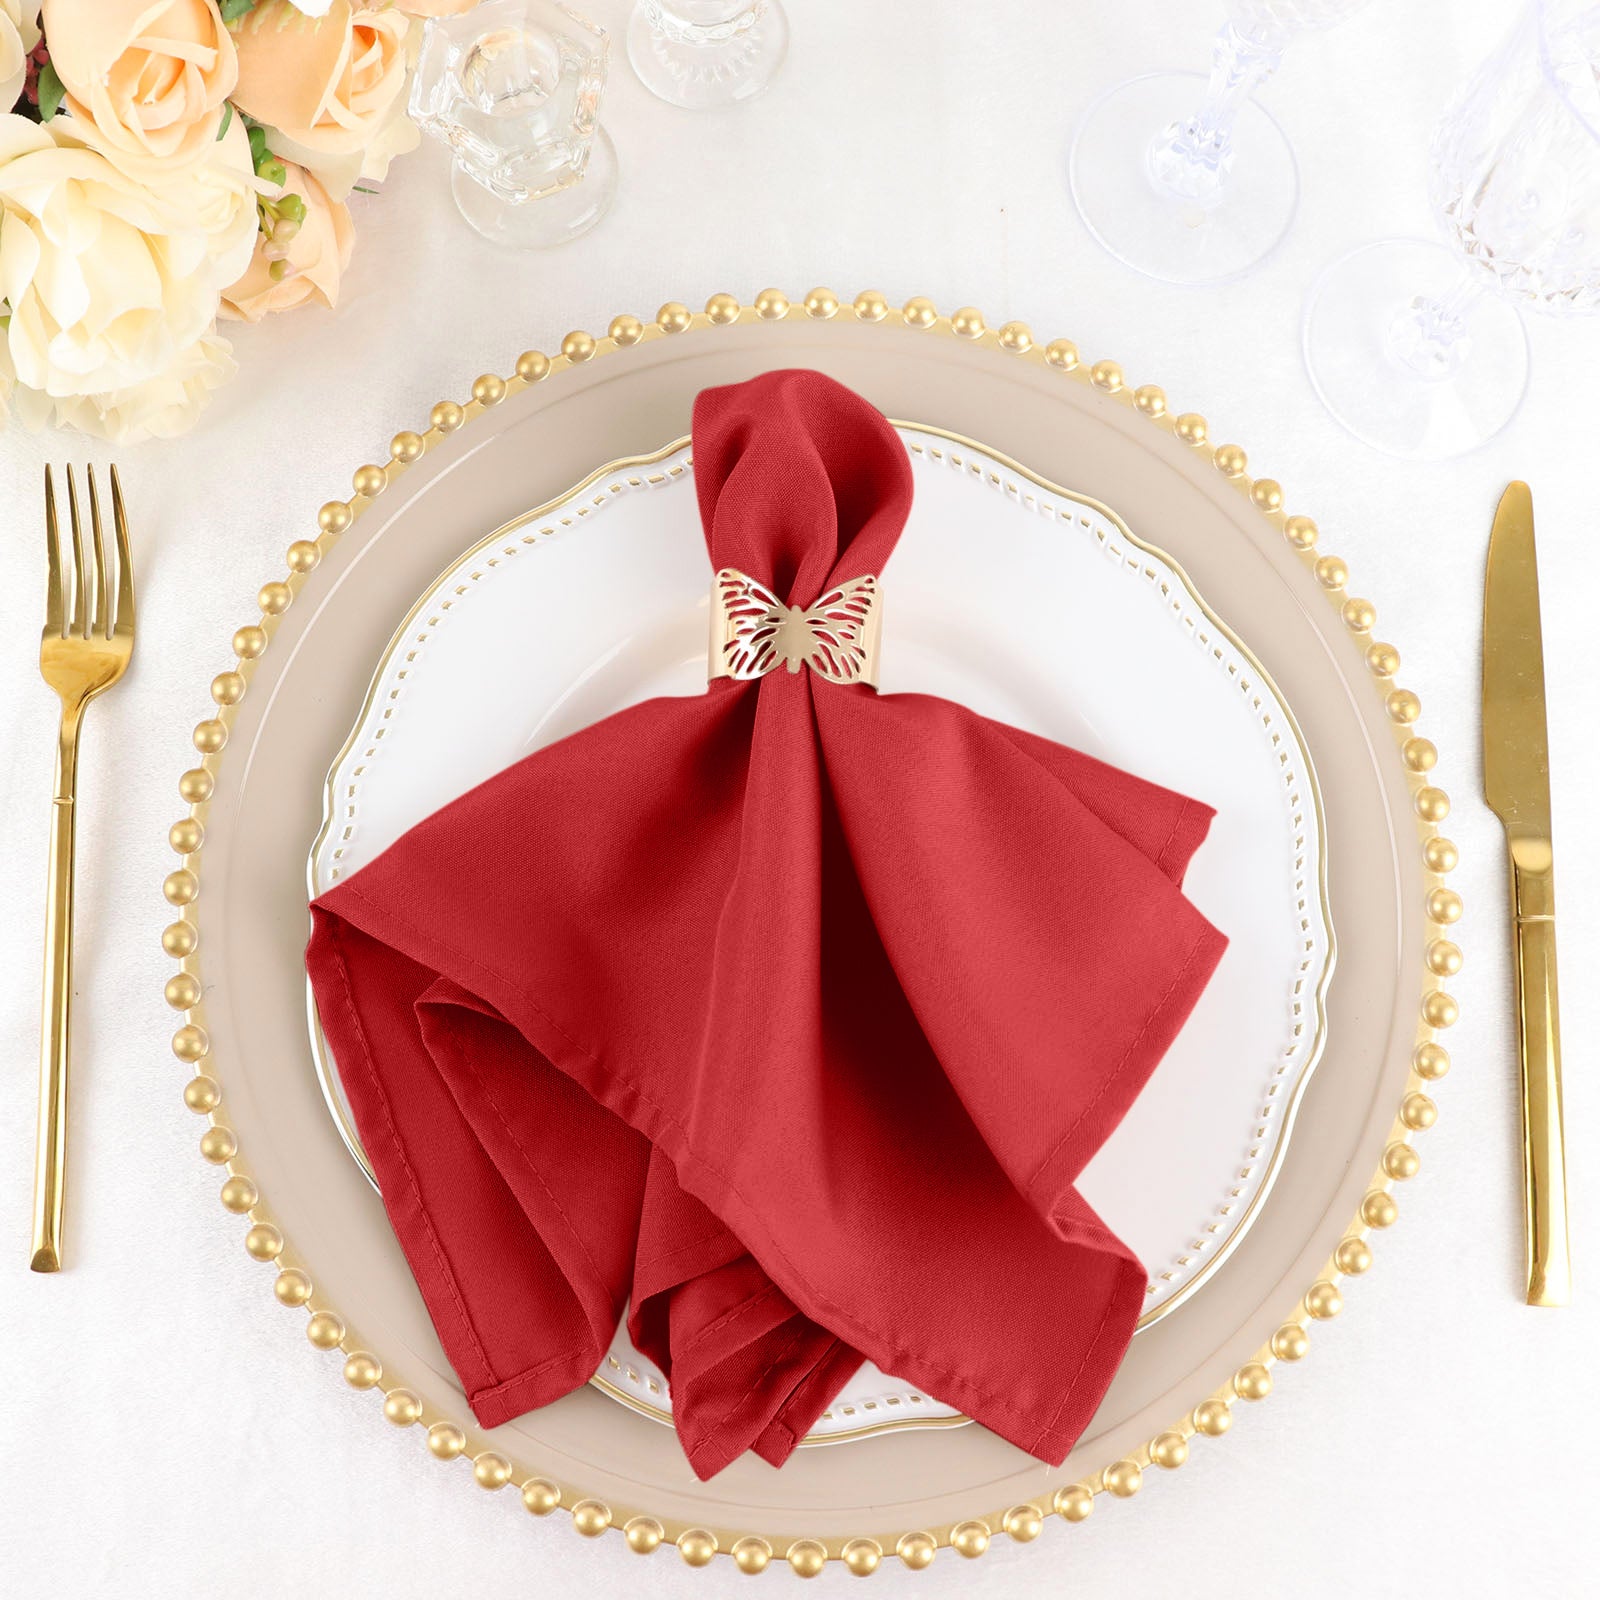 Efavormart Pack of 5 Red Premium 17 x 17 Washable Polyester Napkins Great for Wedding Party Restaurant Dinner Parties